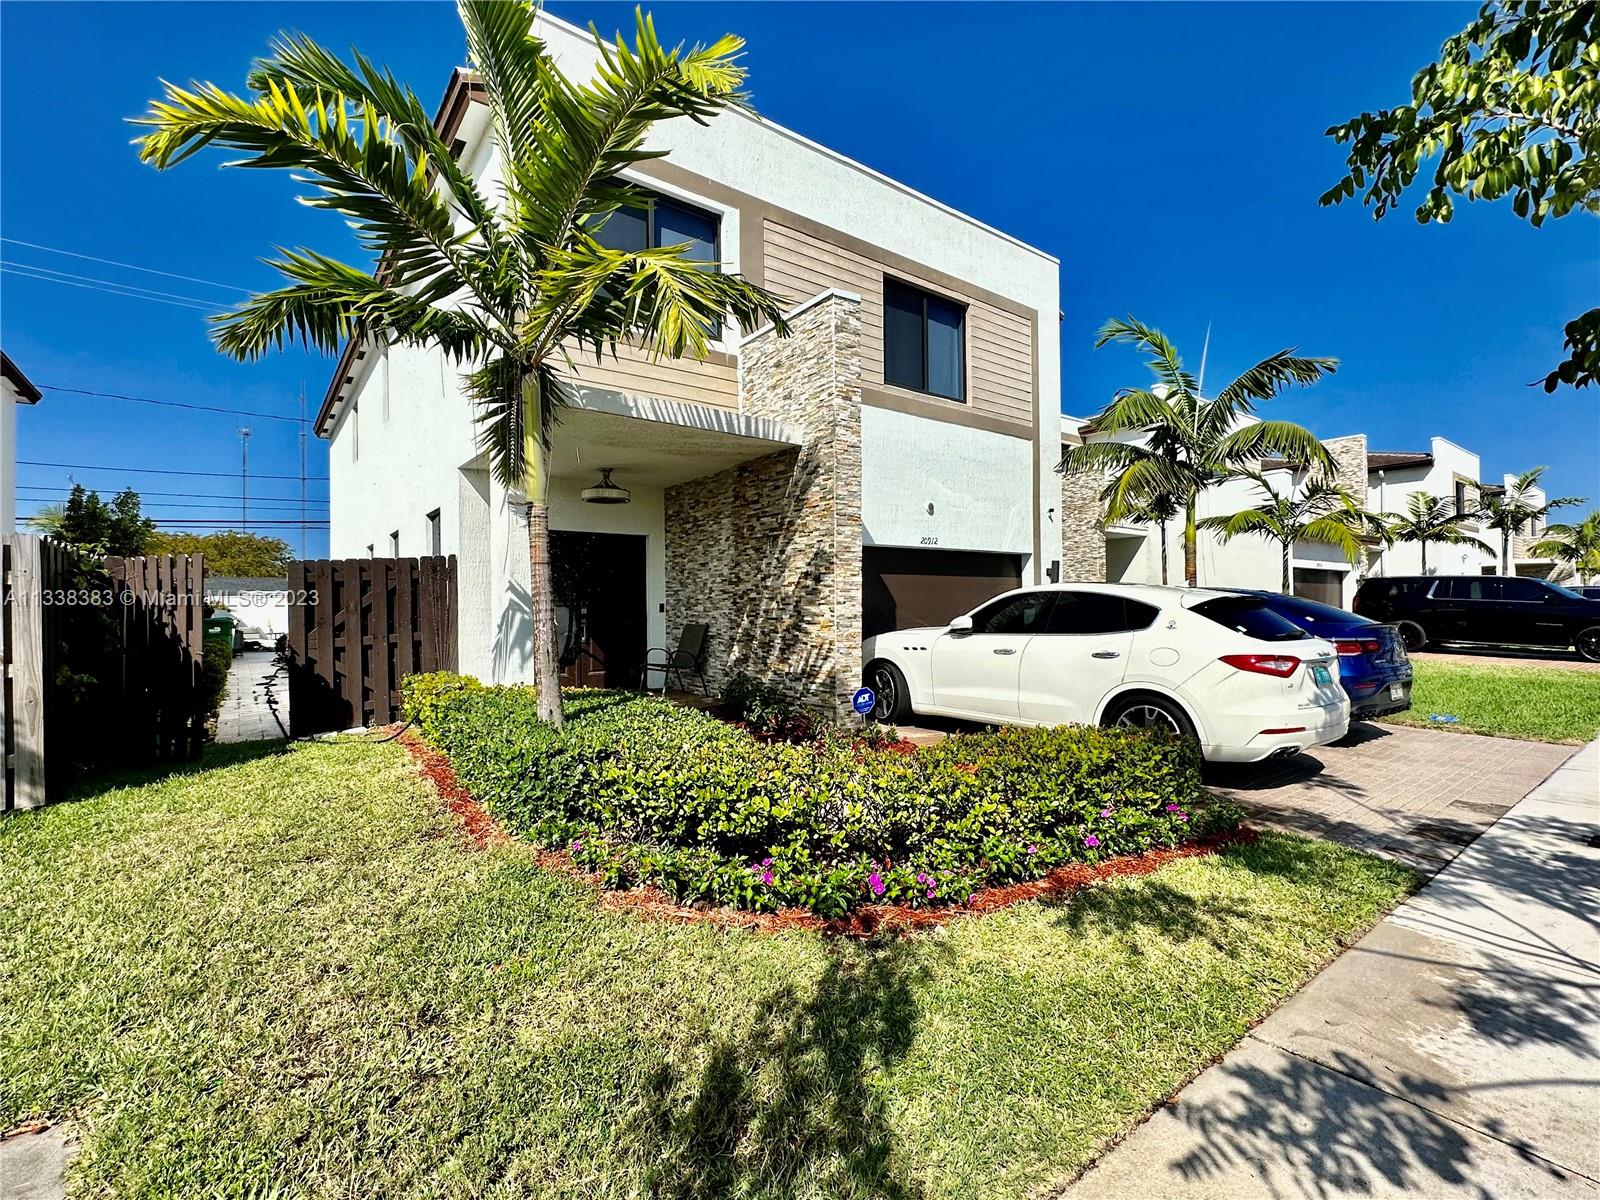 Photo 1 of 20912 2nd Ct in Miami - MLS A11338383